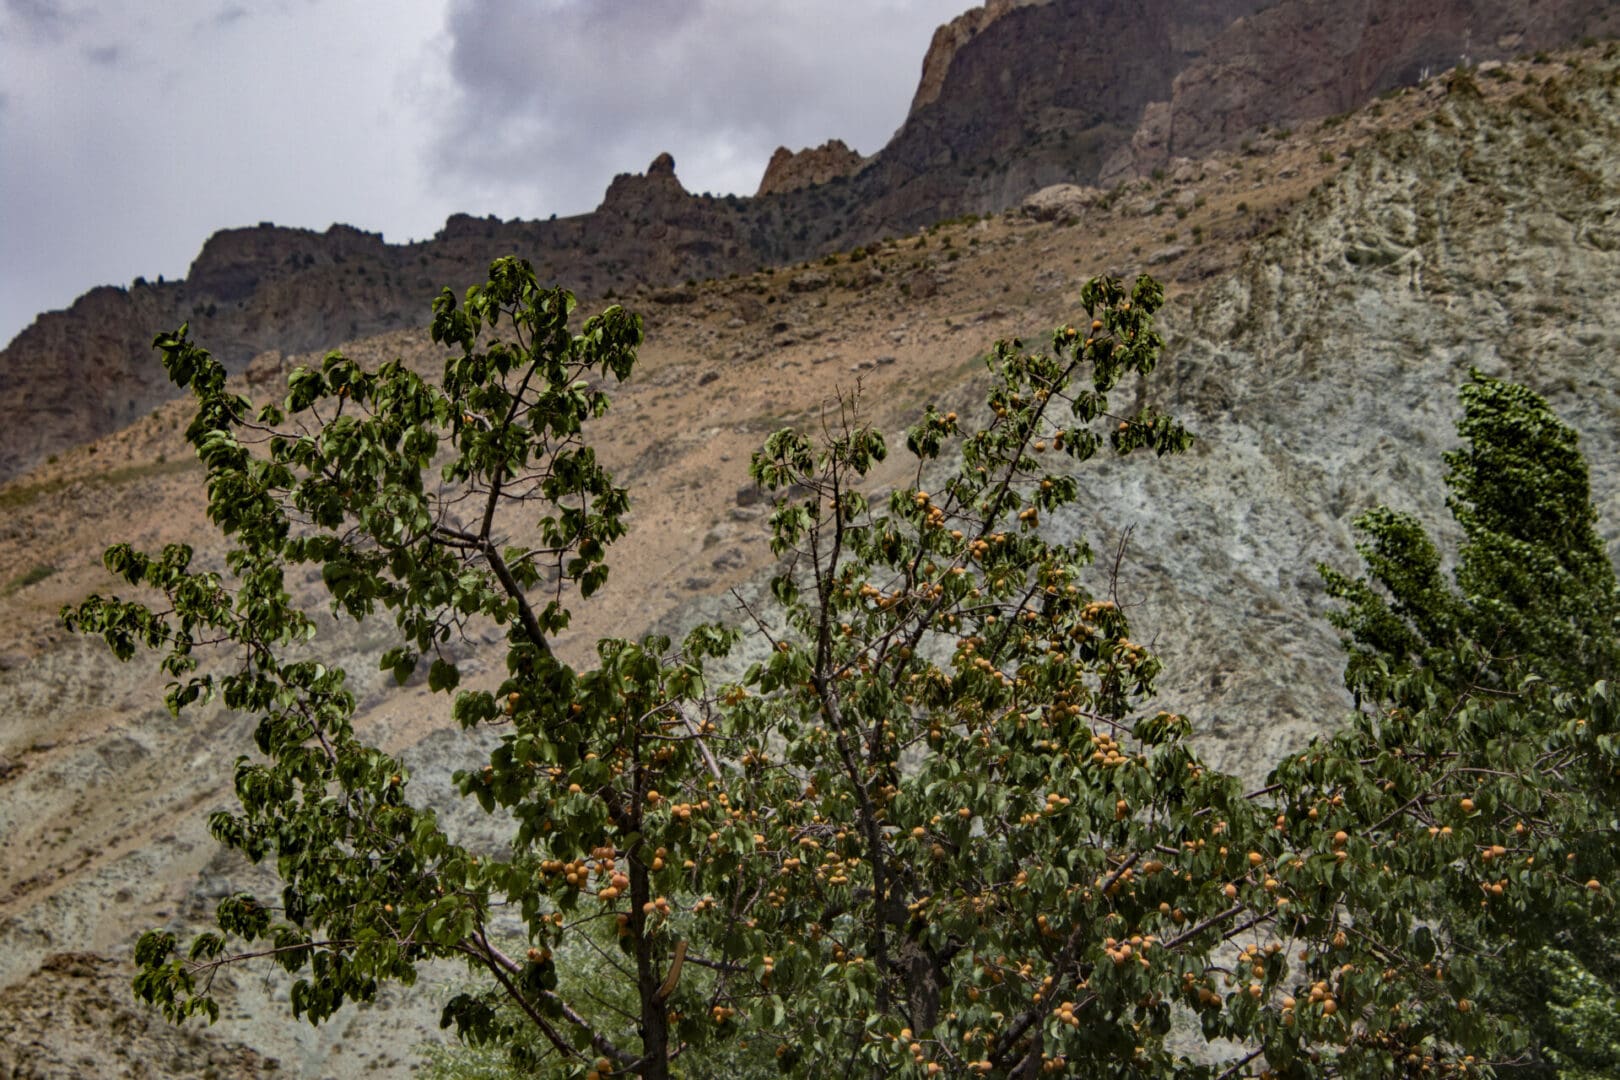 A tree in front of a mountain with a cloudy sky.